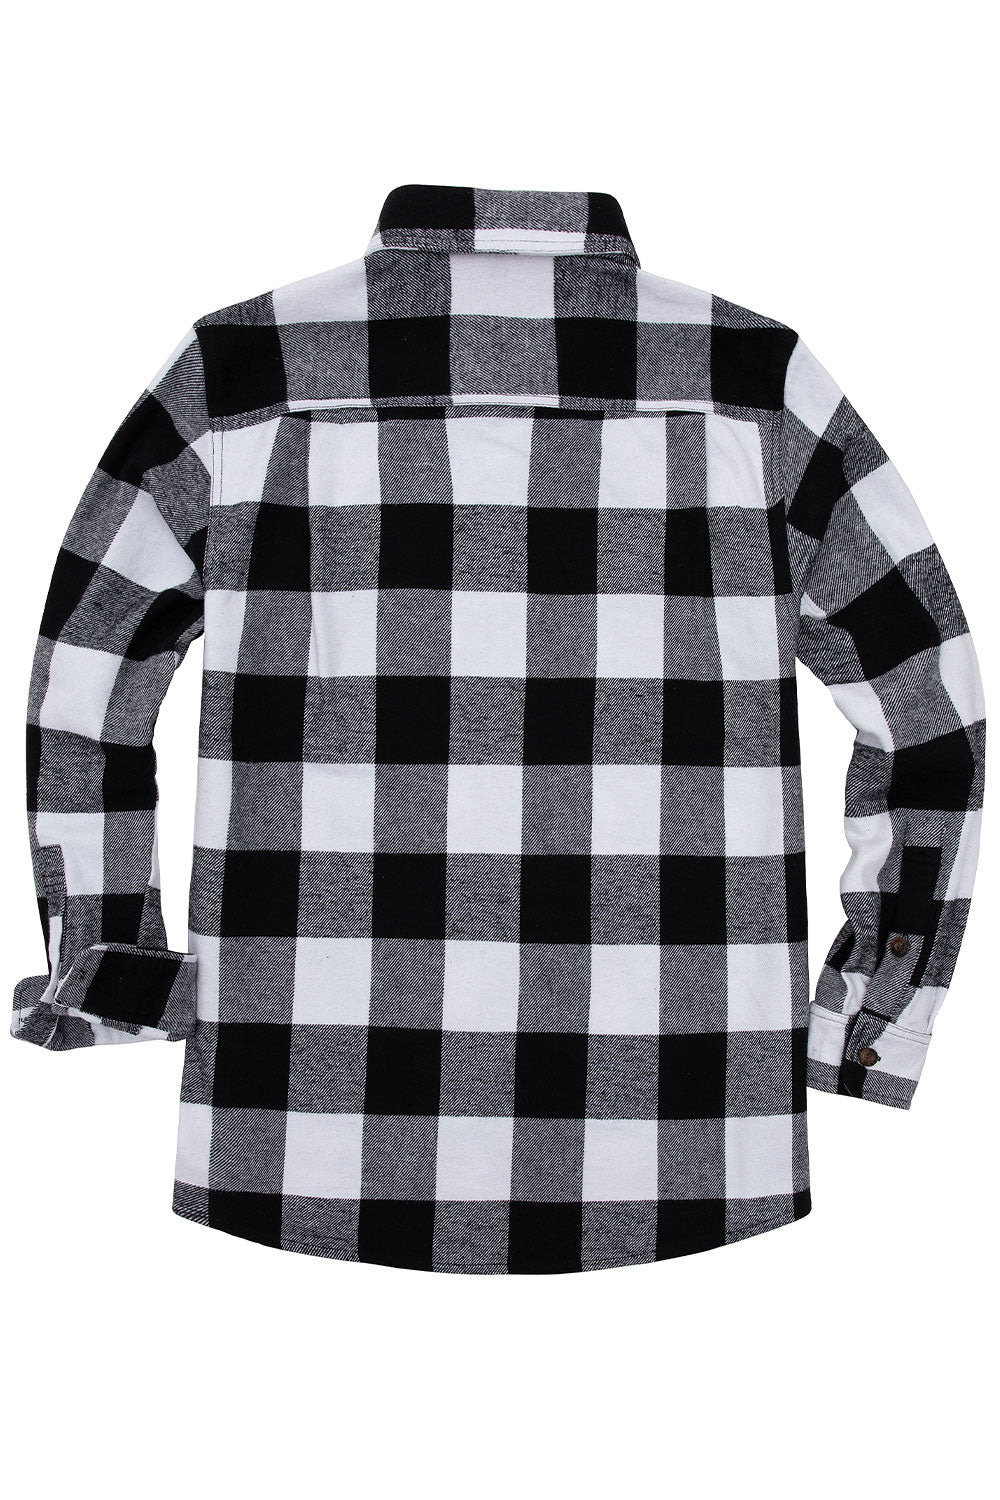 FlannelGo Mens Heavy Flannel Shirts,Double Brushed Cotton 10.6oz